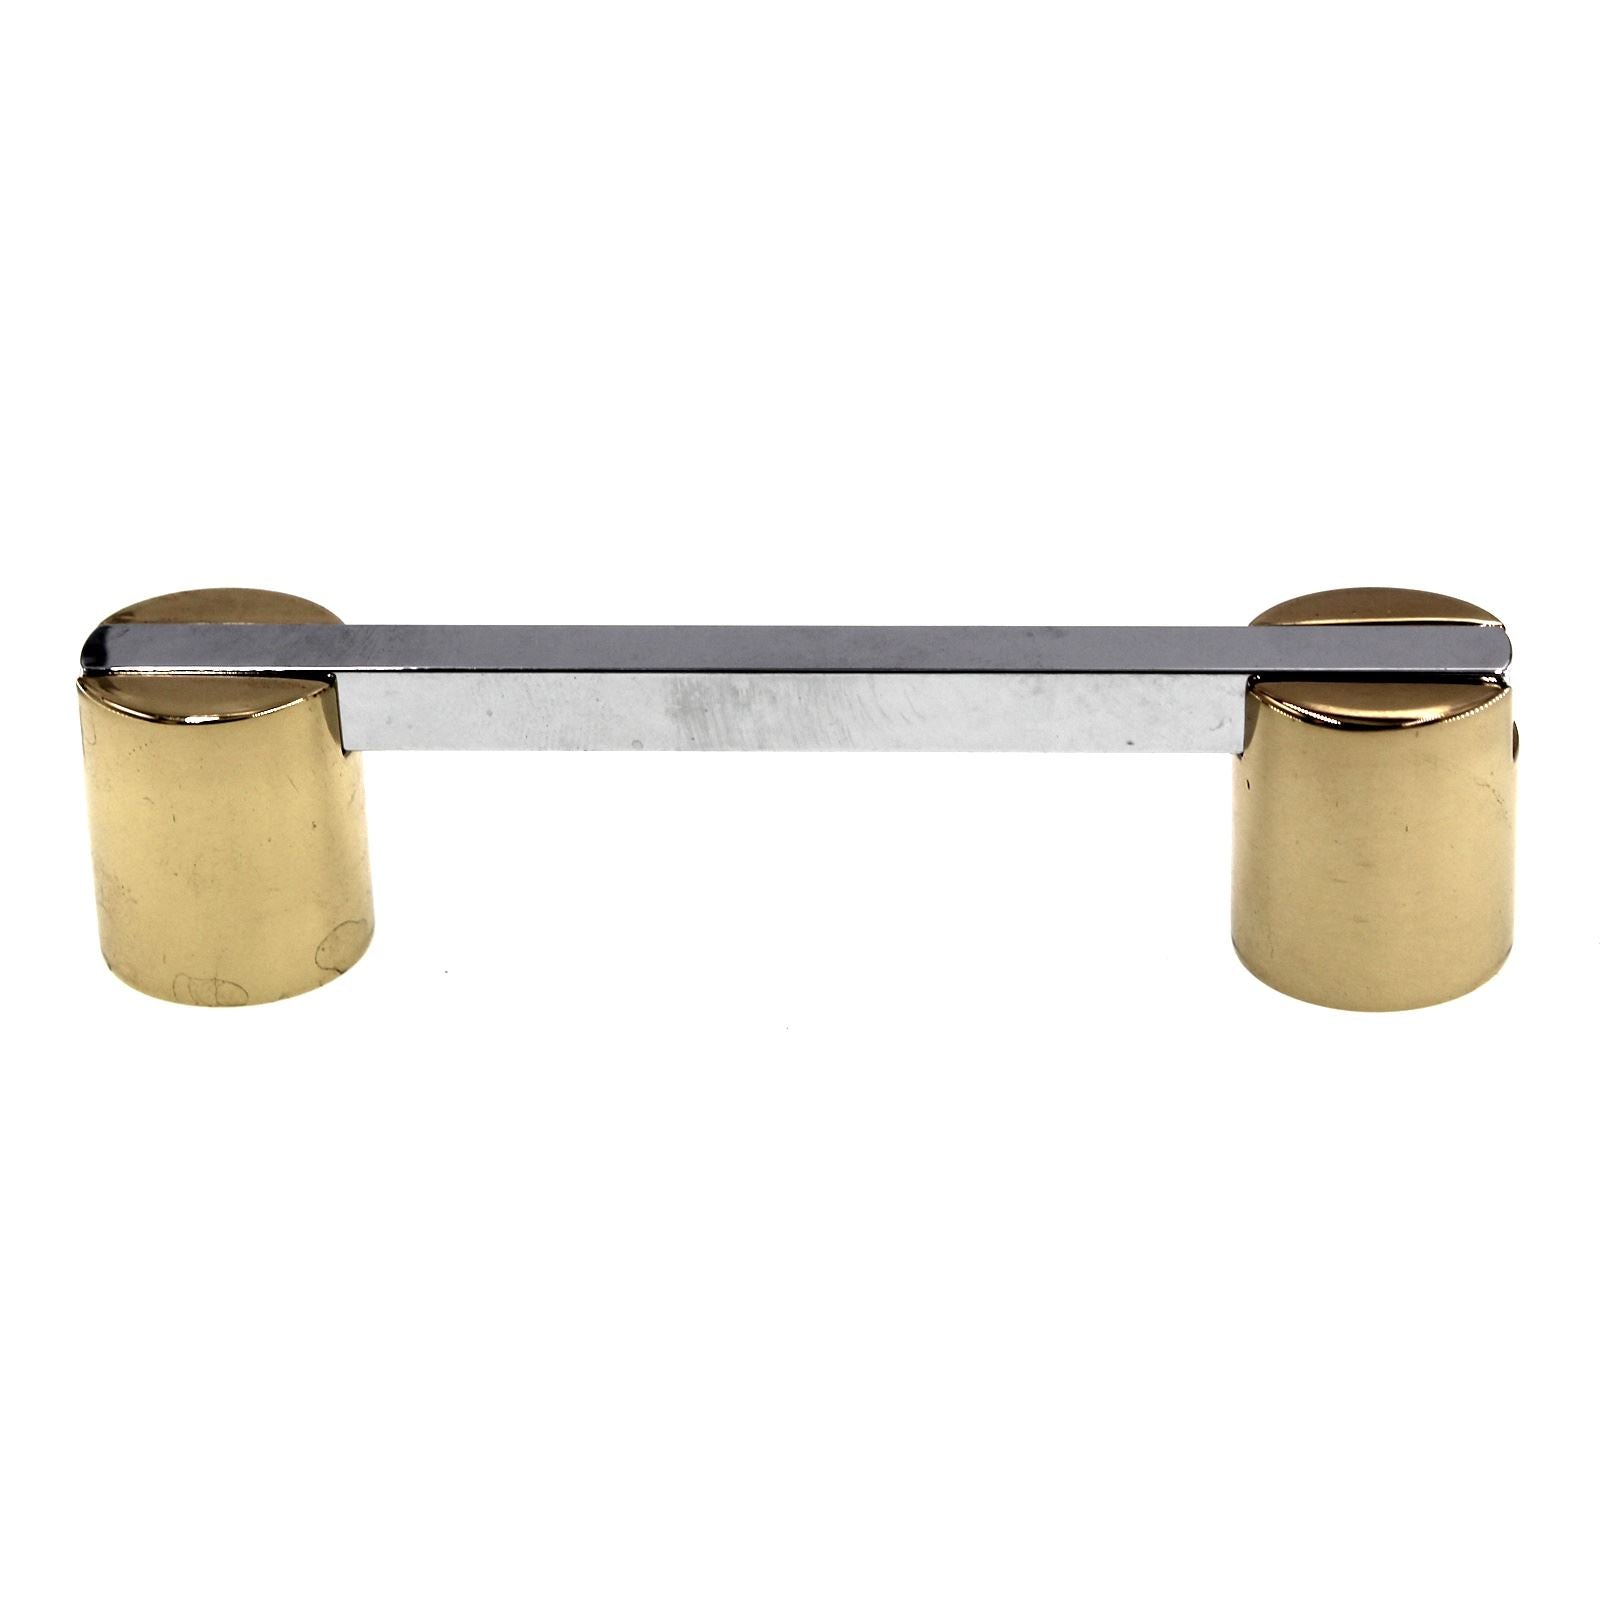 Period Brass Cabinet Pull 3" Ctr Two-Tone Polished Chrome Solid Brass C133